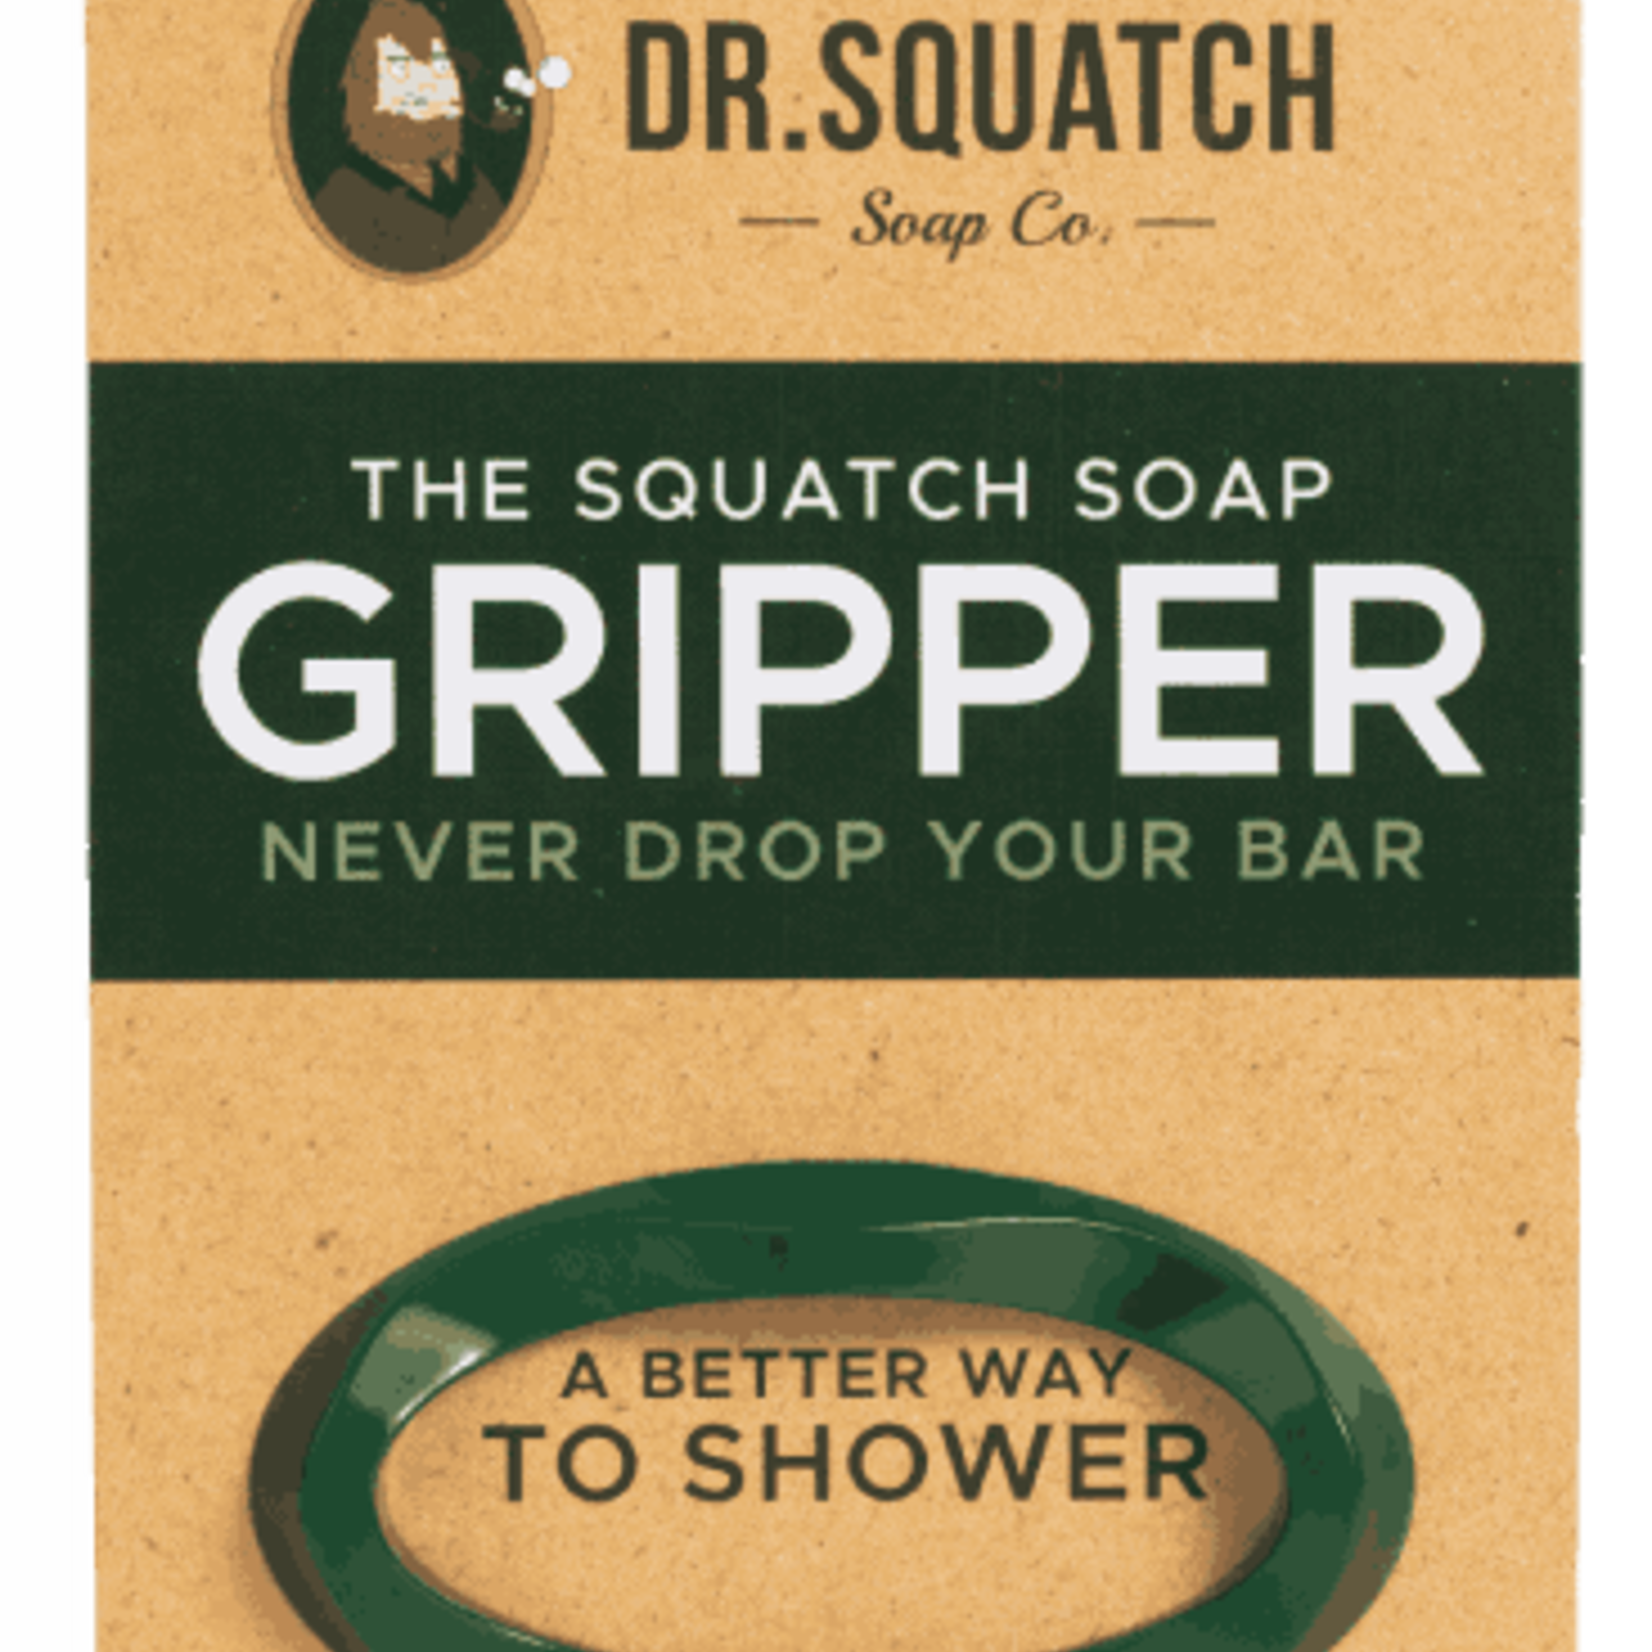 Dr. Squatch Soaps: Curiosity Spawns Searches, Ecommerce During